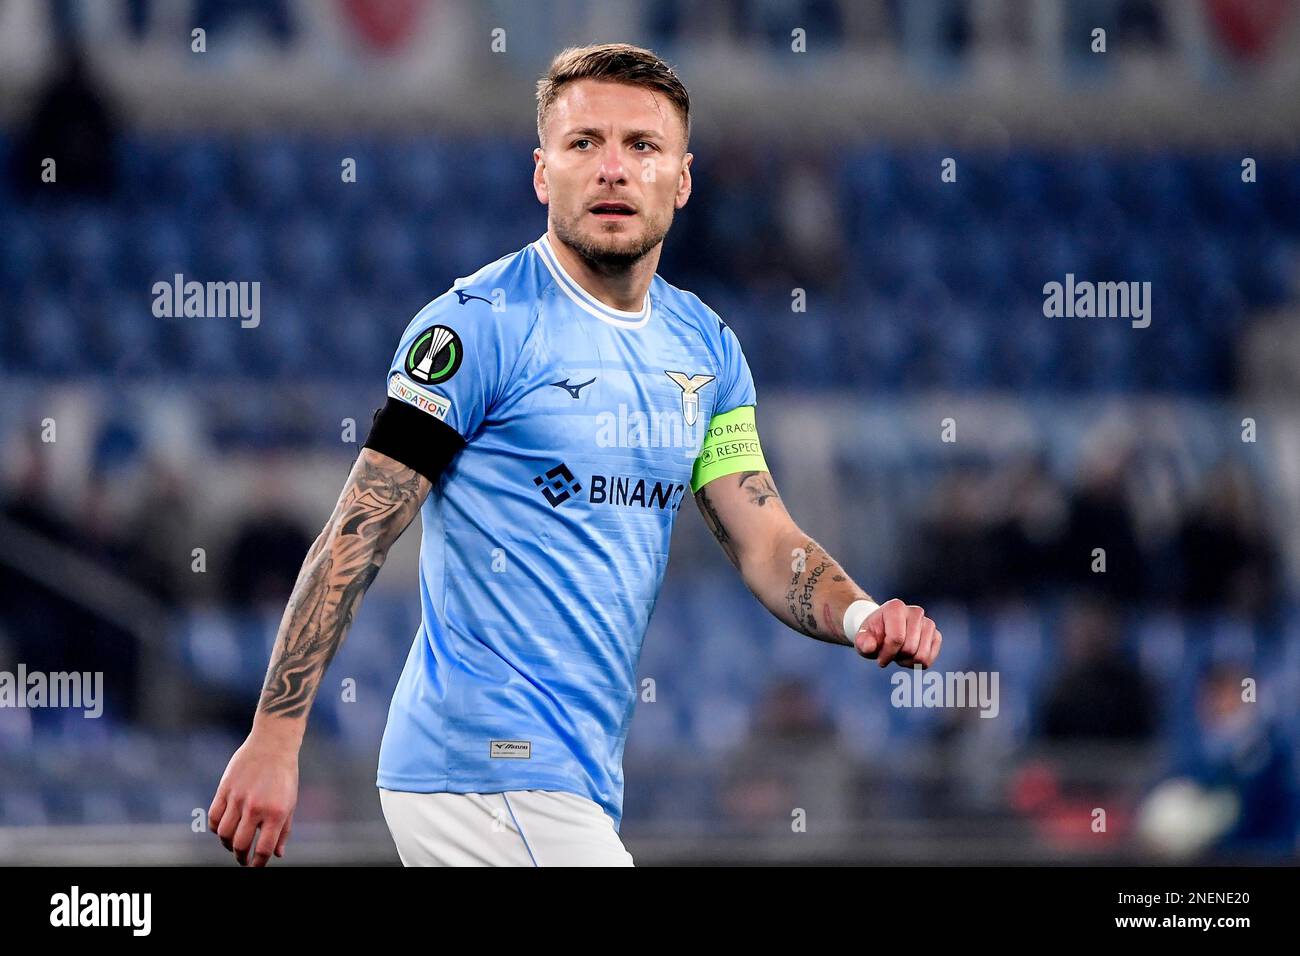 Roma, Italy. 16th Feb, 2023. Ciro Immobile of SS Lazio during the Conference League football match between SS Lazio and CFR Cluj at Olimpico stadium in Roma (Italy), February 16th 2023. Photo Andrea Staccioli/Insidefoto Credit: Insidefoto di andrea staccioli/Alamy Live News Stock Photo